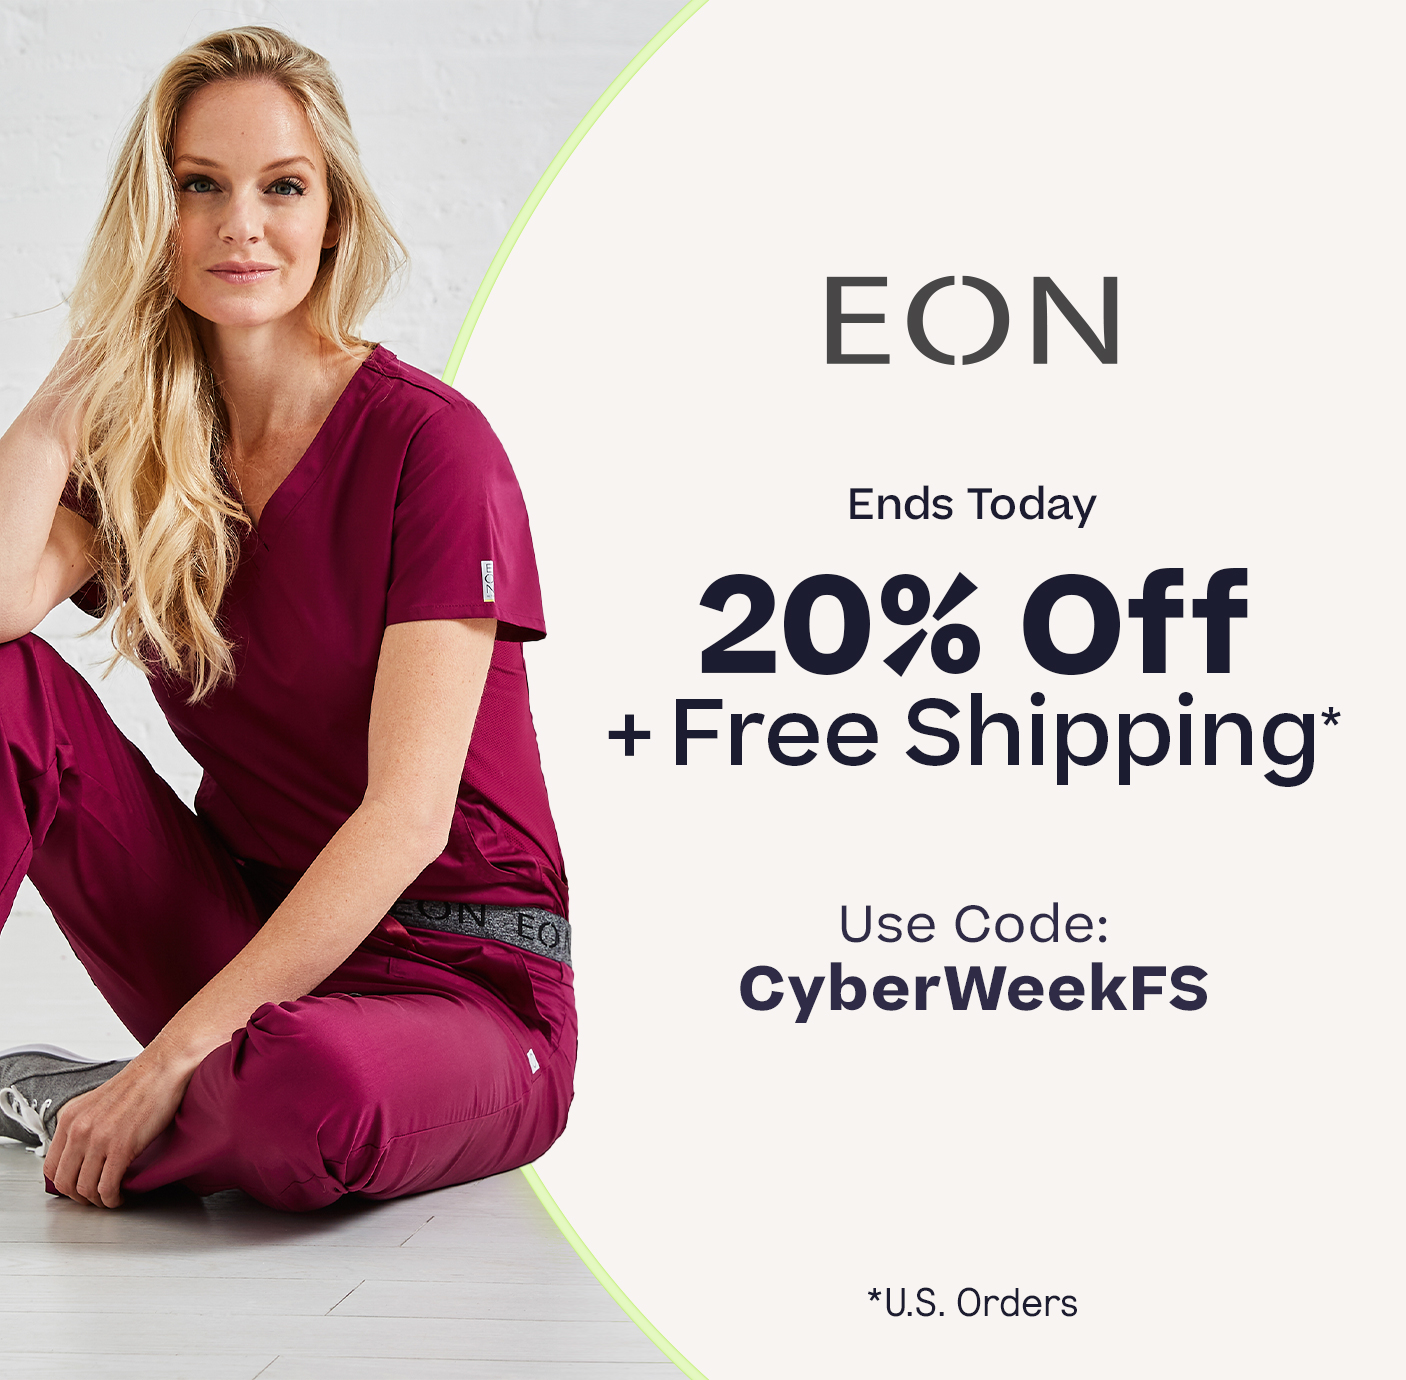 Ends Today 20% Off EON plus Free Shipping* Code: CYBERWEEKFS Rewards Members Get 2x Points